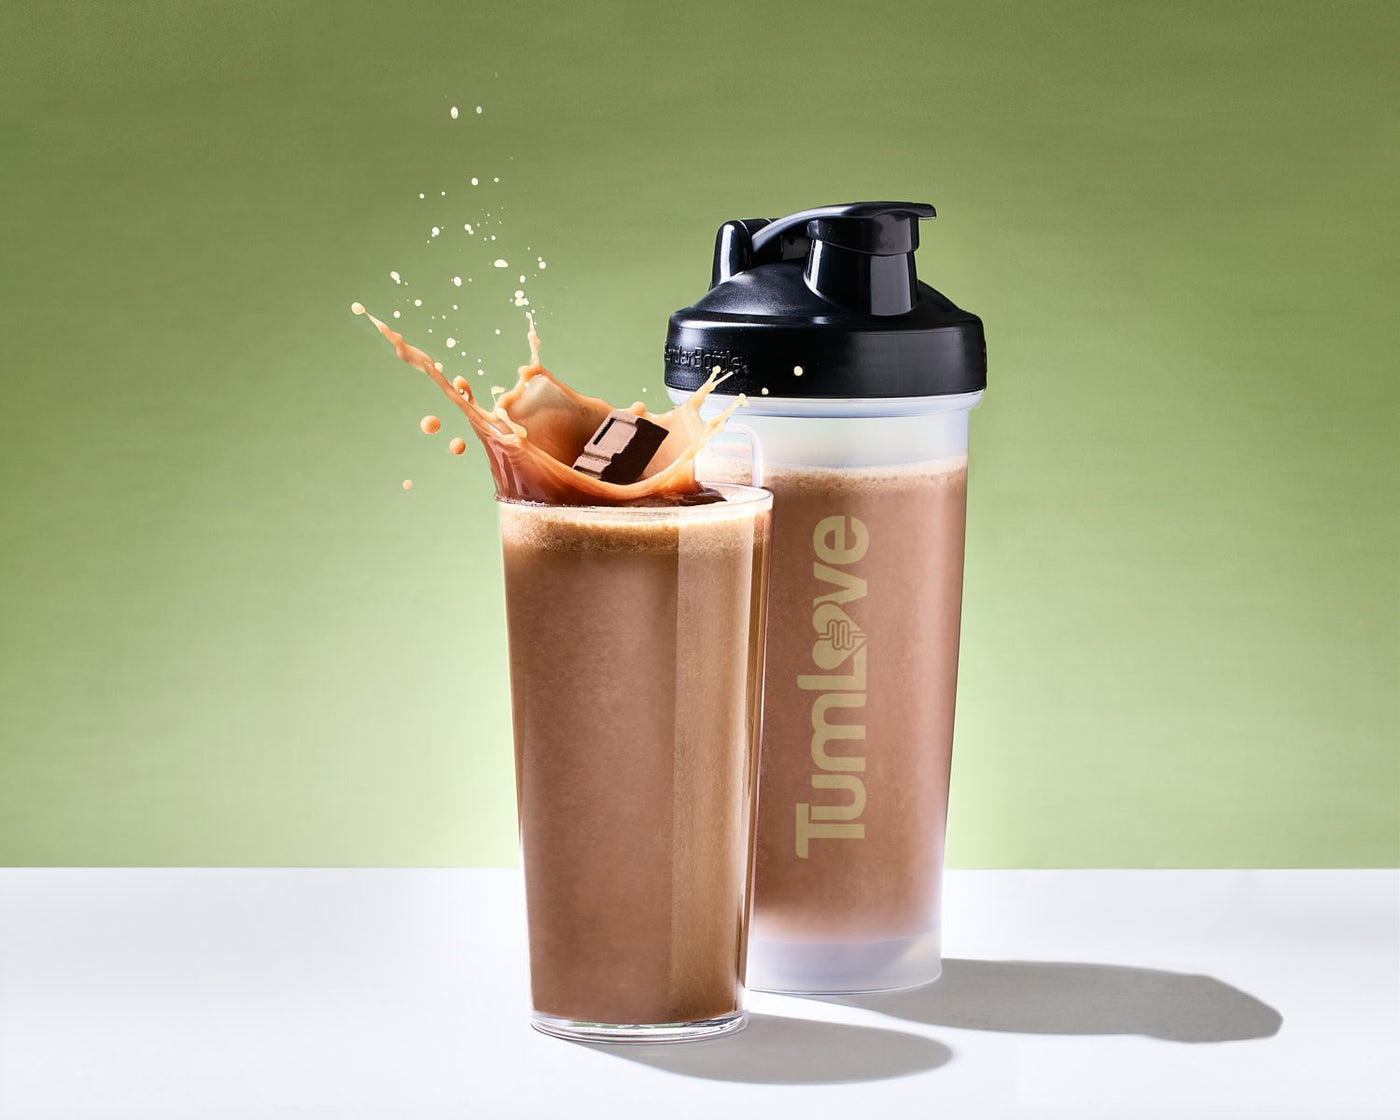 Shakesphere Bottle Review: The Best Protein Shaker?